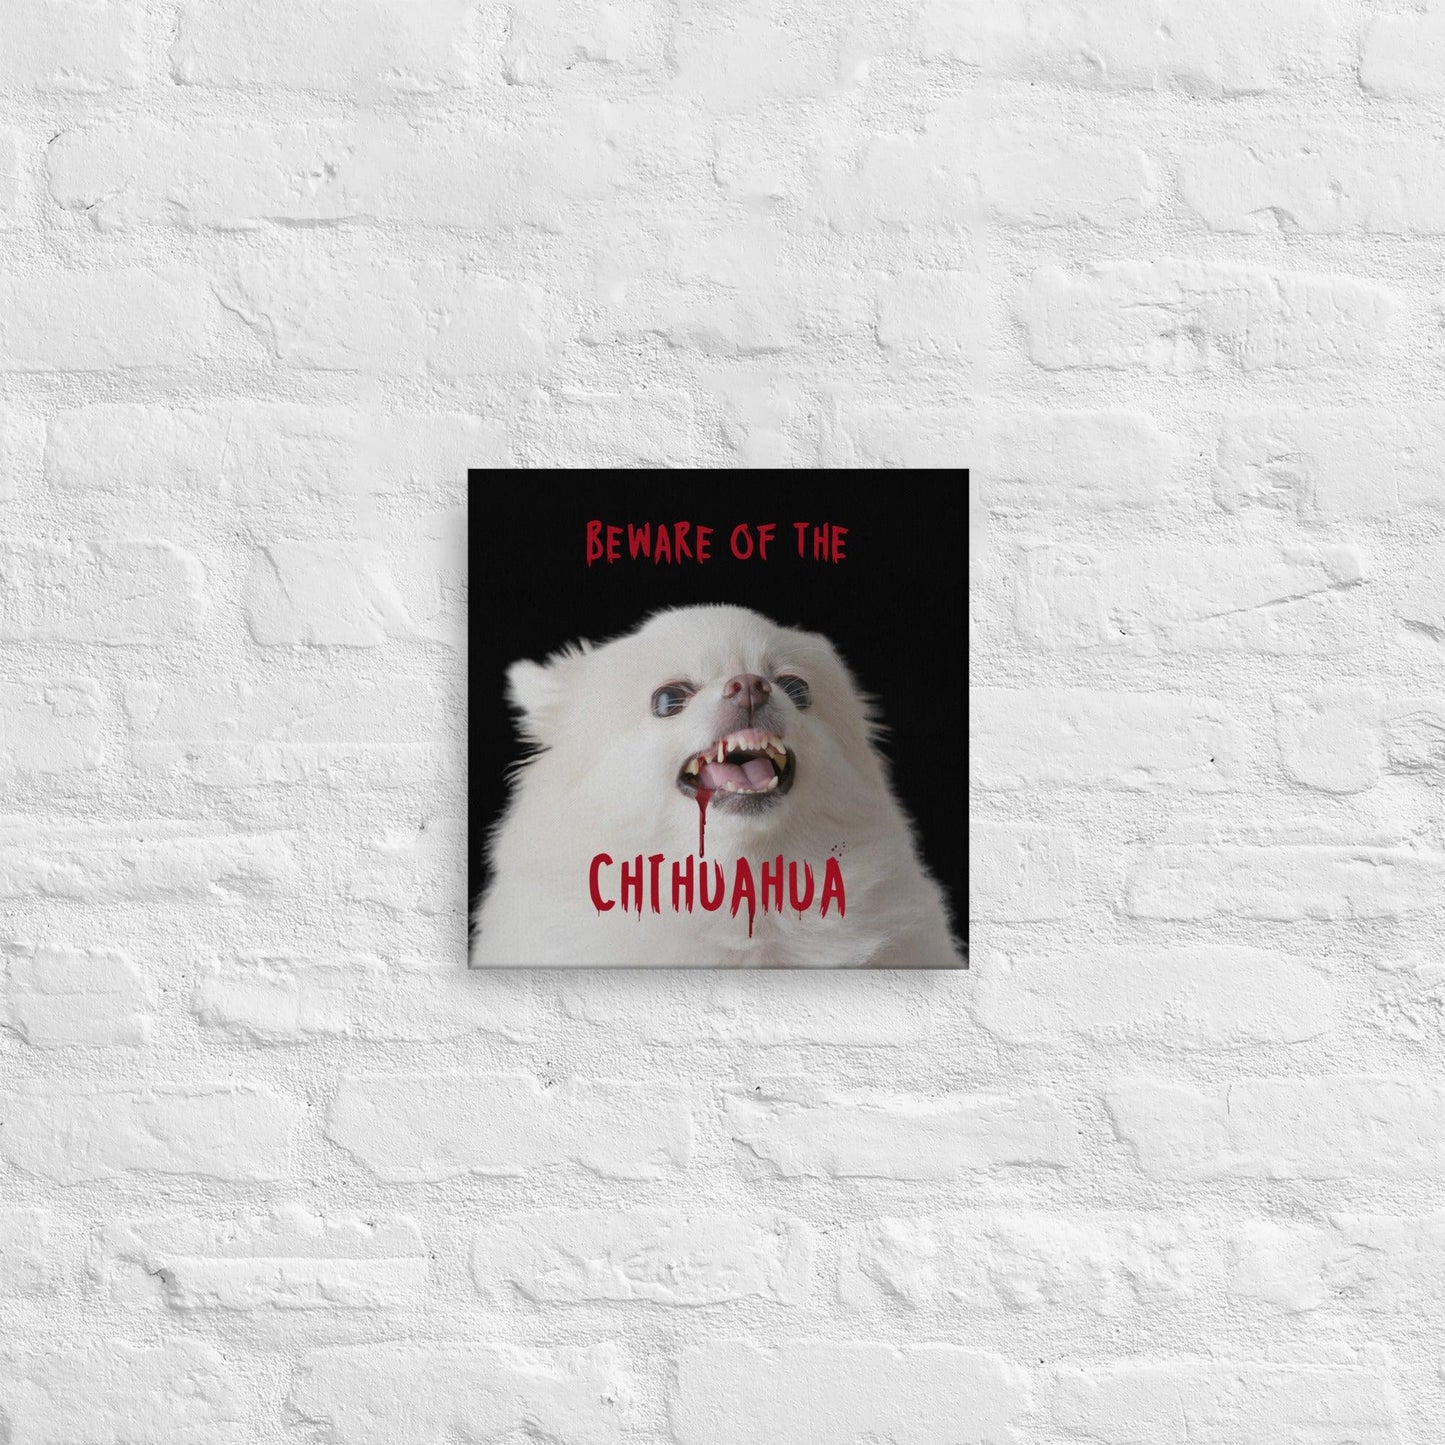 BEWARE OF THE CHIHUAHUA - one of the famous Chimigos chihuahua memes. This is a vivid and fade resistant art print on a stretched canvas. An angelic fluffy white chihuahua with bloody fangs reminds us that looks can be deceiving. Beware of the chihuahua! A punky gift idea for someone whose house is guarded by a cute but vicious little chi. Perfect for the new chihuahua parent, as a housewarming gift, or maybe for Halloween!